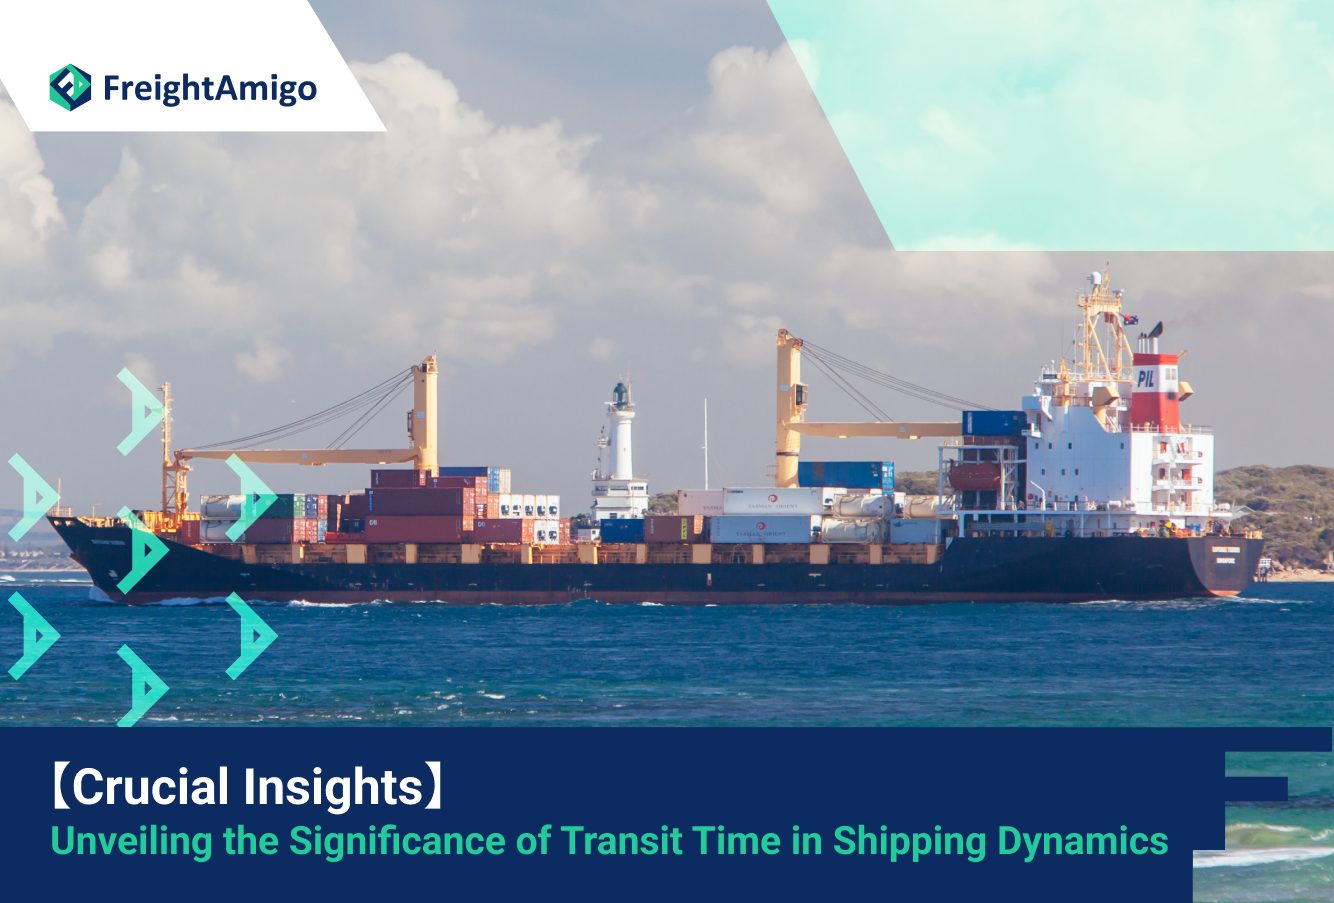 Crucial Insights: Unveiling the Significance of Transit Time in Shipping Dynamics